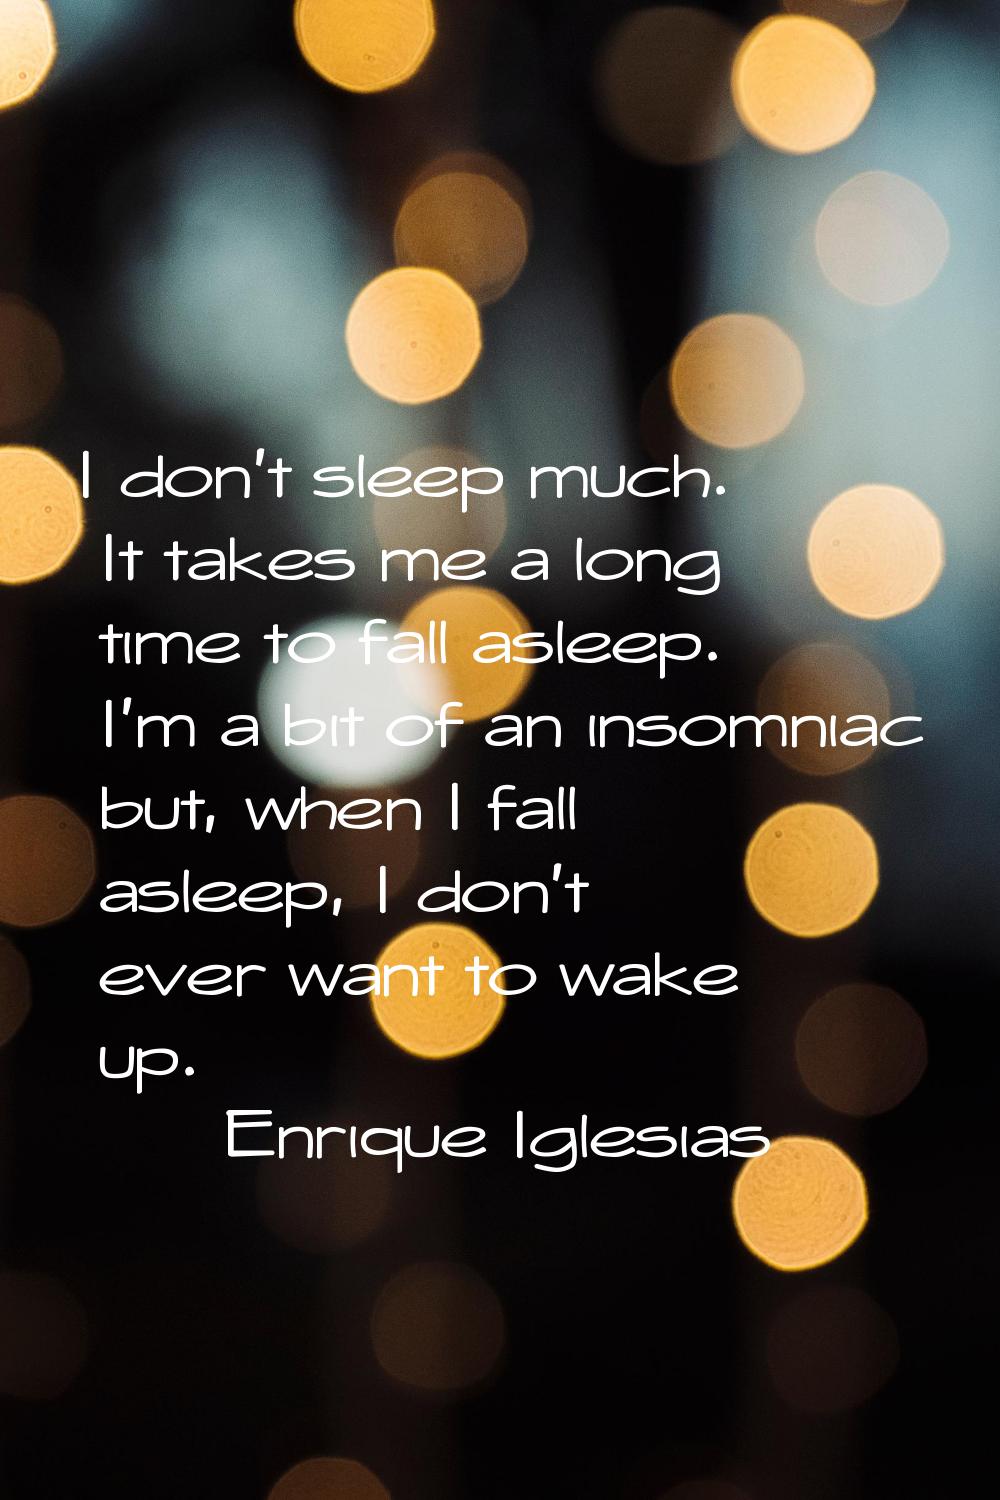 I don't sleep much. It takes me a long time to fall asleep. I'm a bit of an insomniac but, when I f